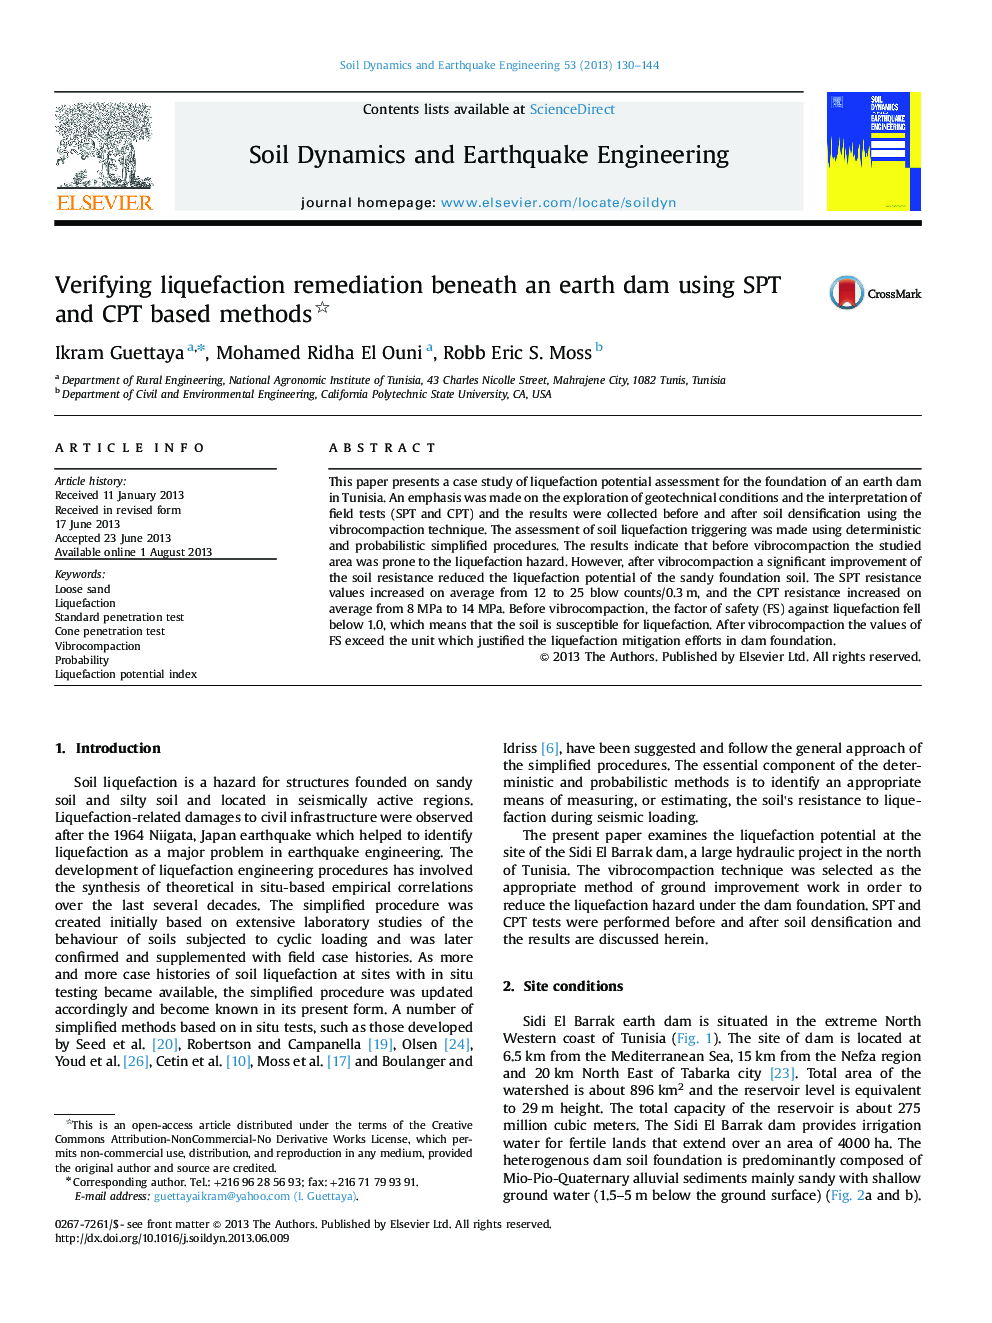 Verifying liquefaction remediation beneath an earth dam using SPT and CPT based methods